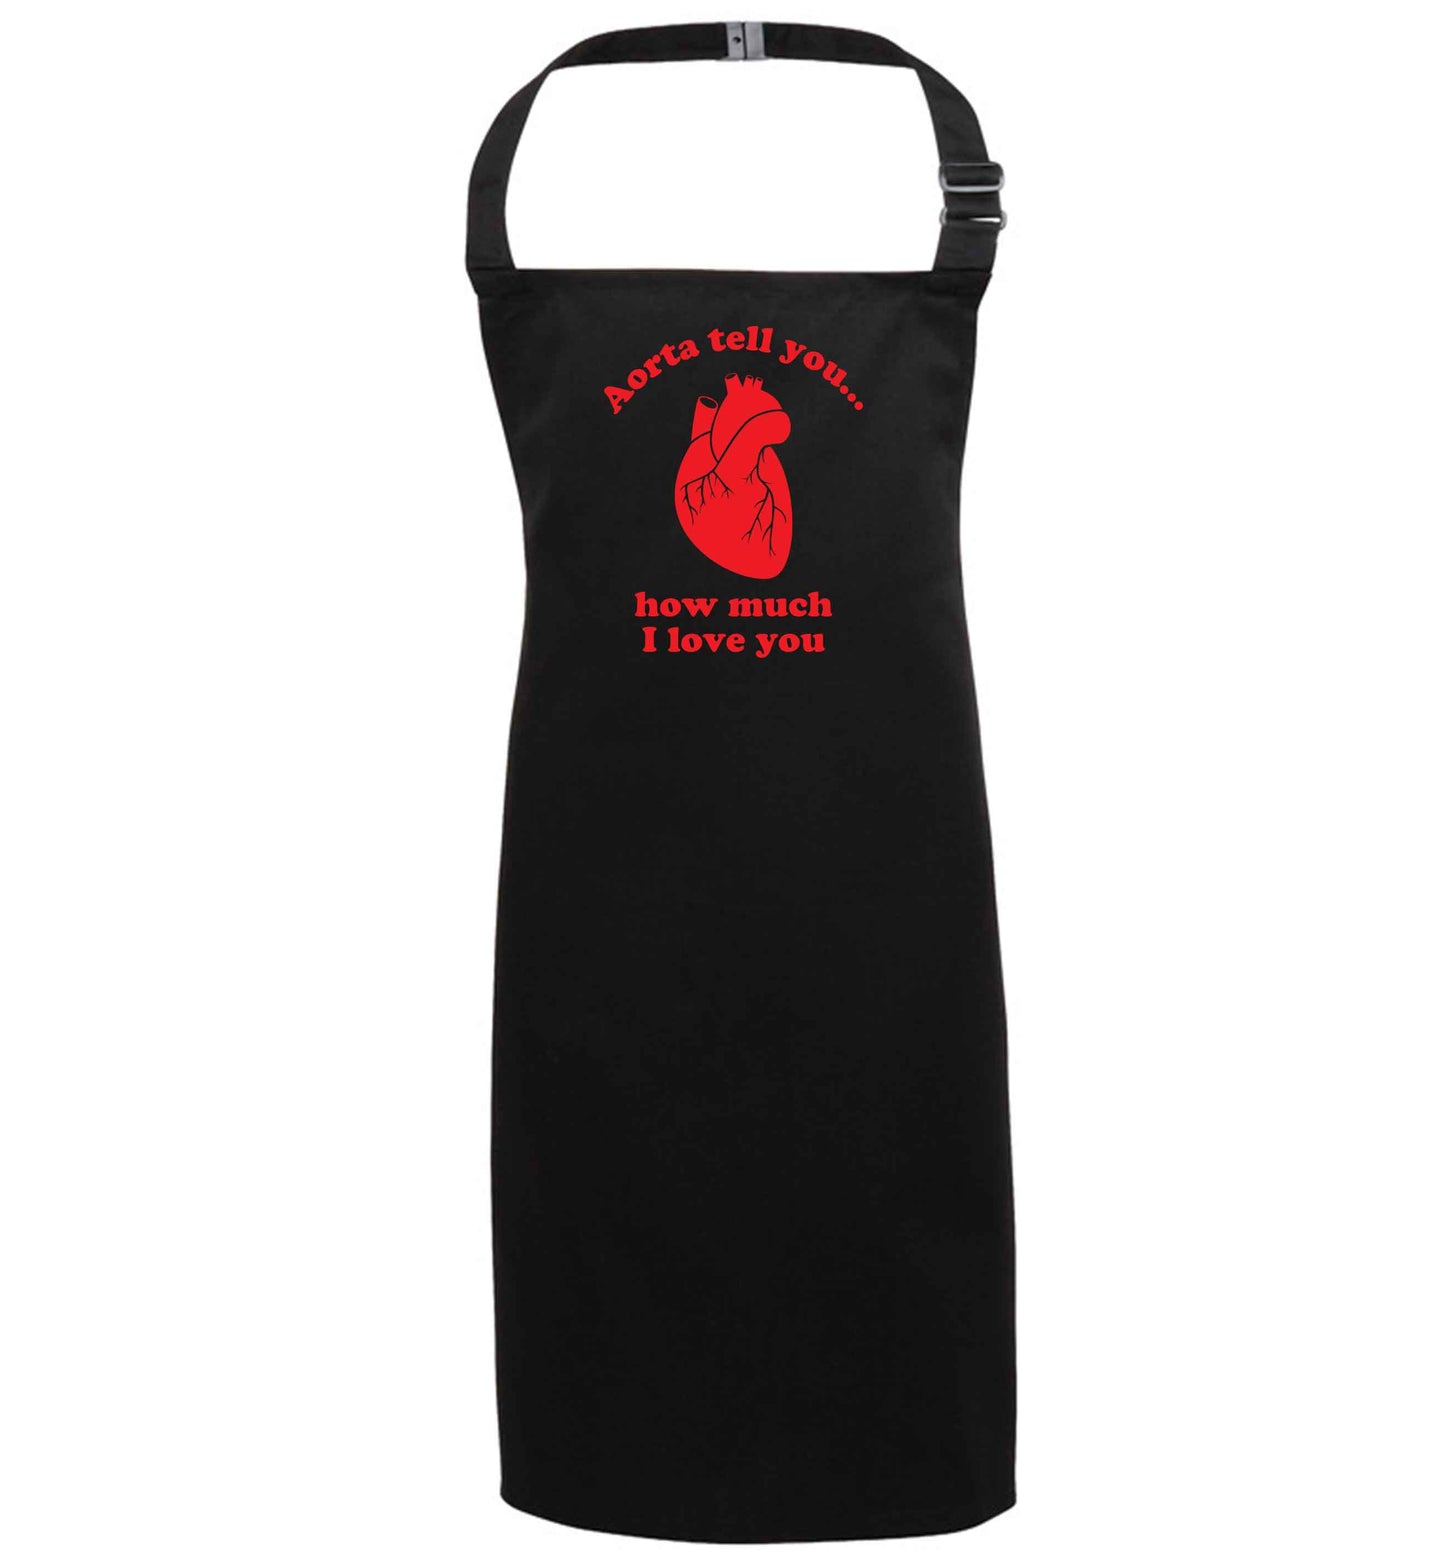 Aorta tell you how much I love you black apron 7-10 years